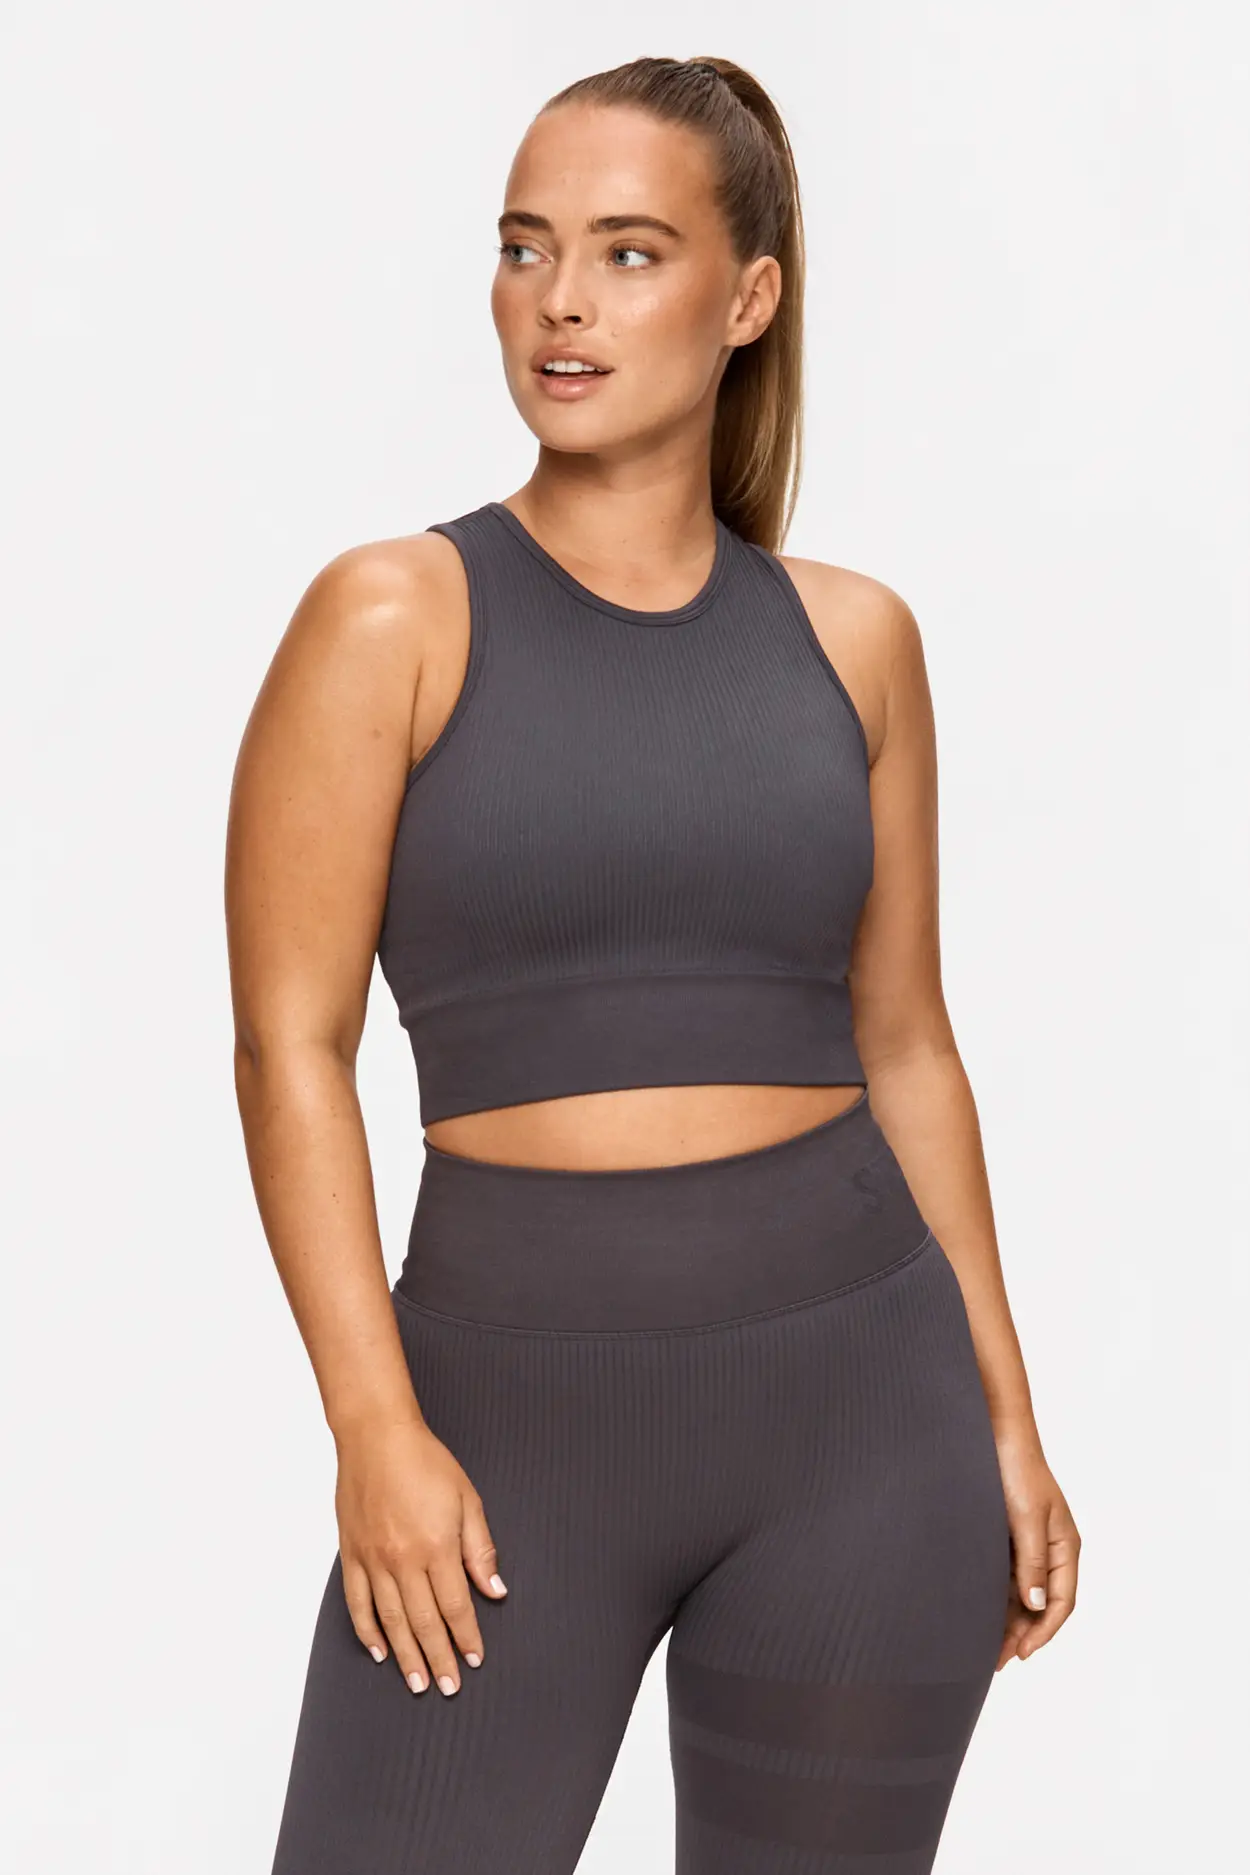 Plus Size Seamless Ribbed Knit Cropped Cami Active Fitness Workout